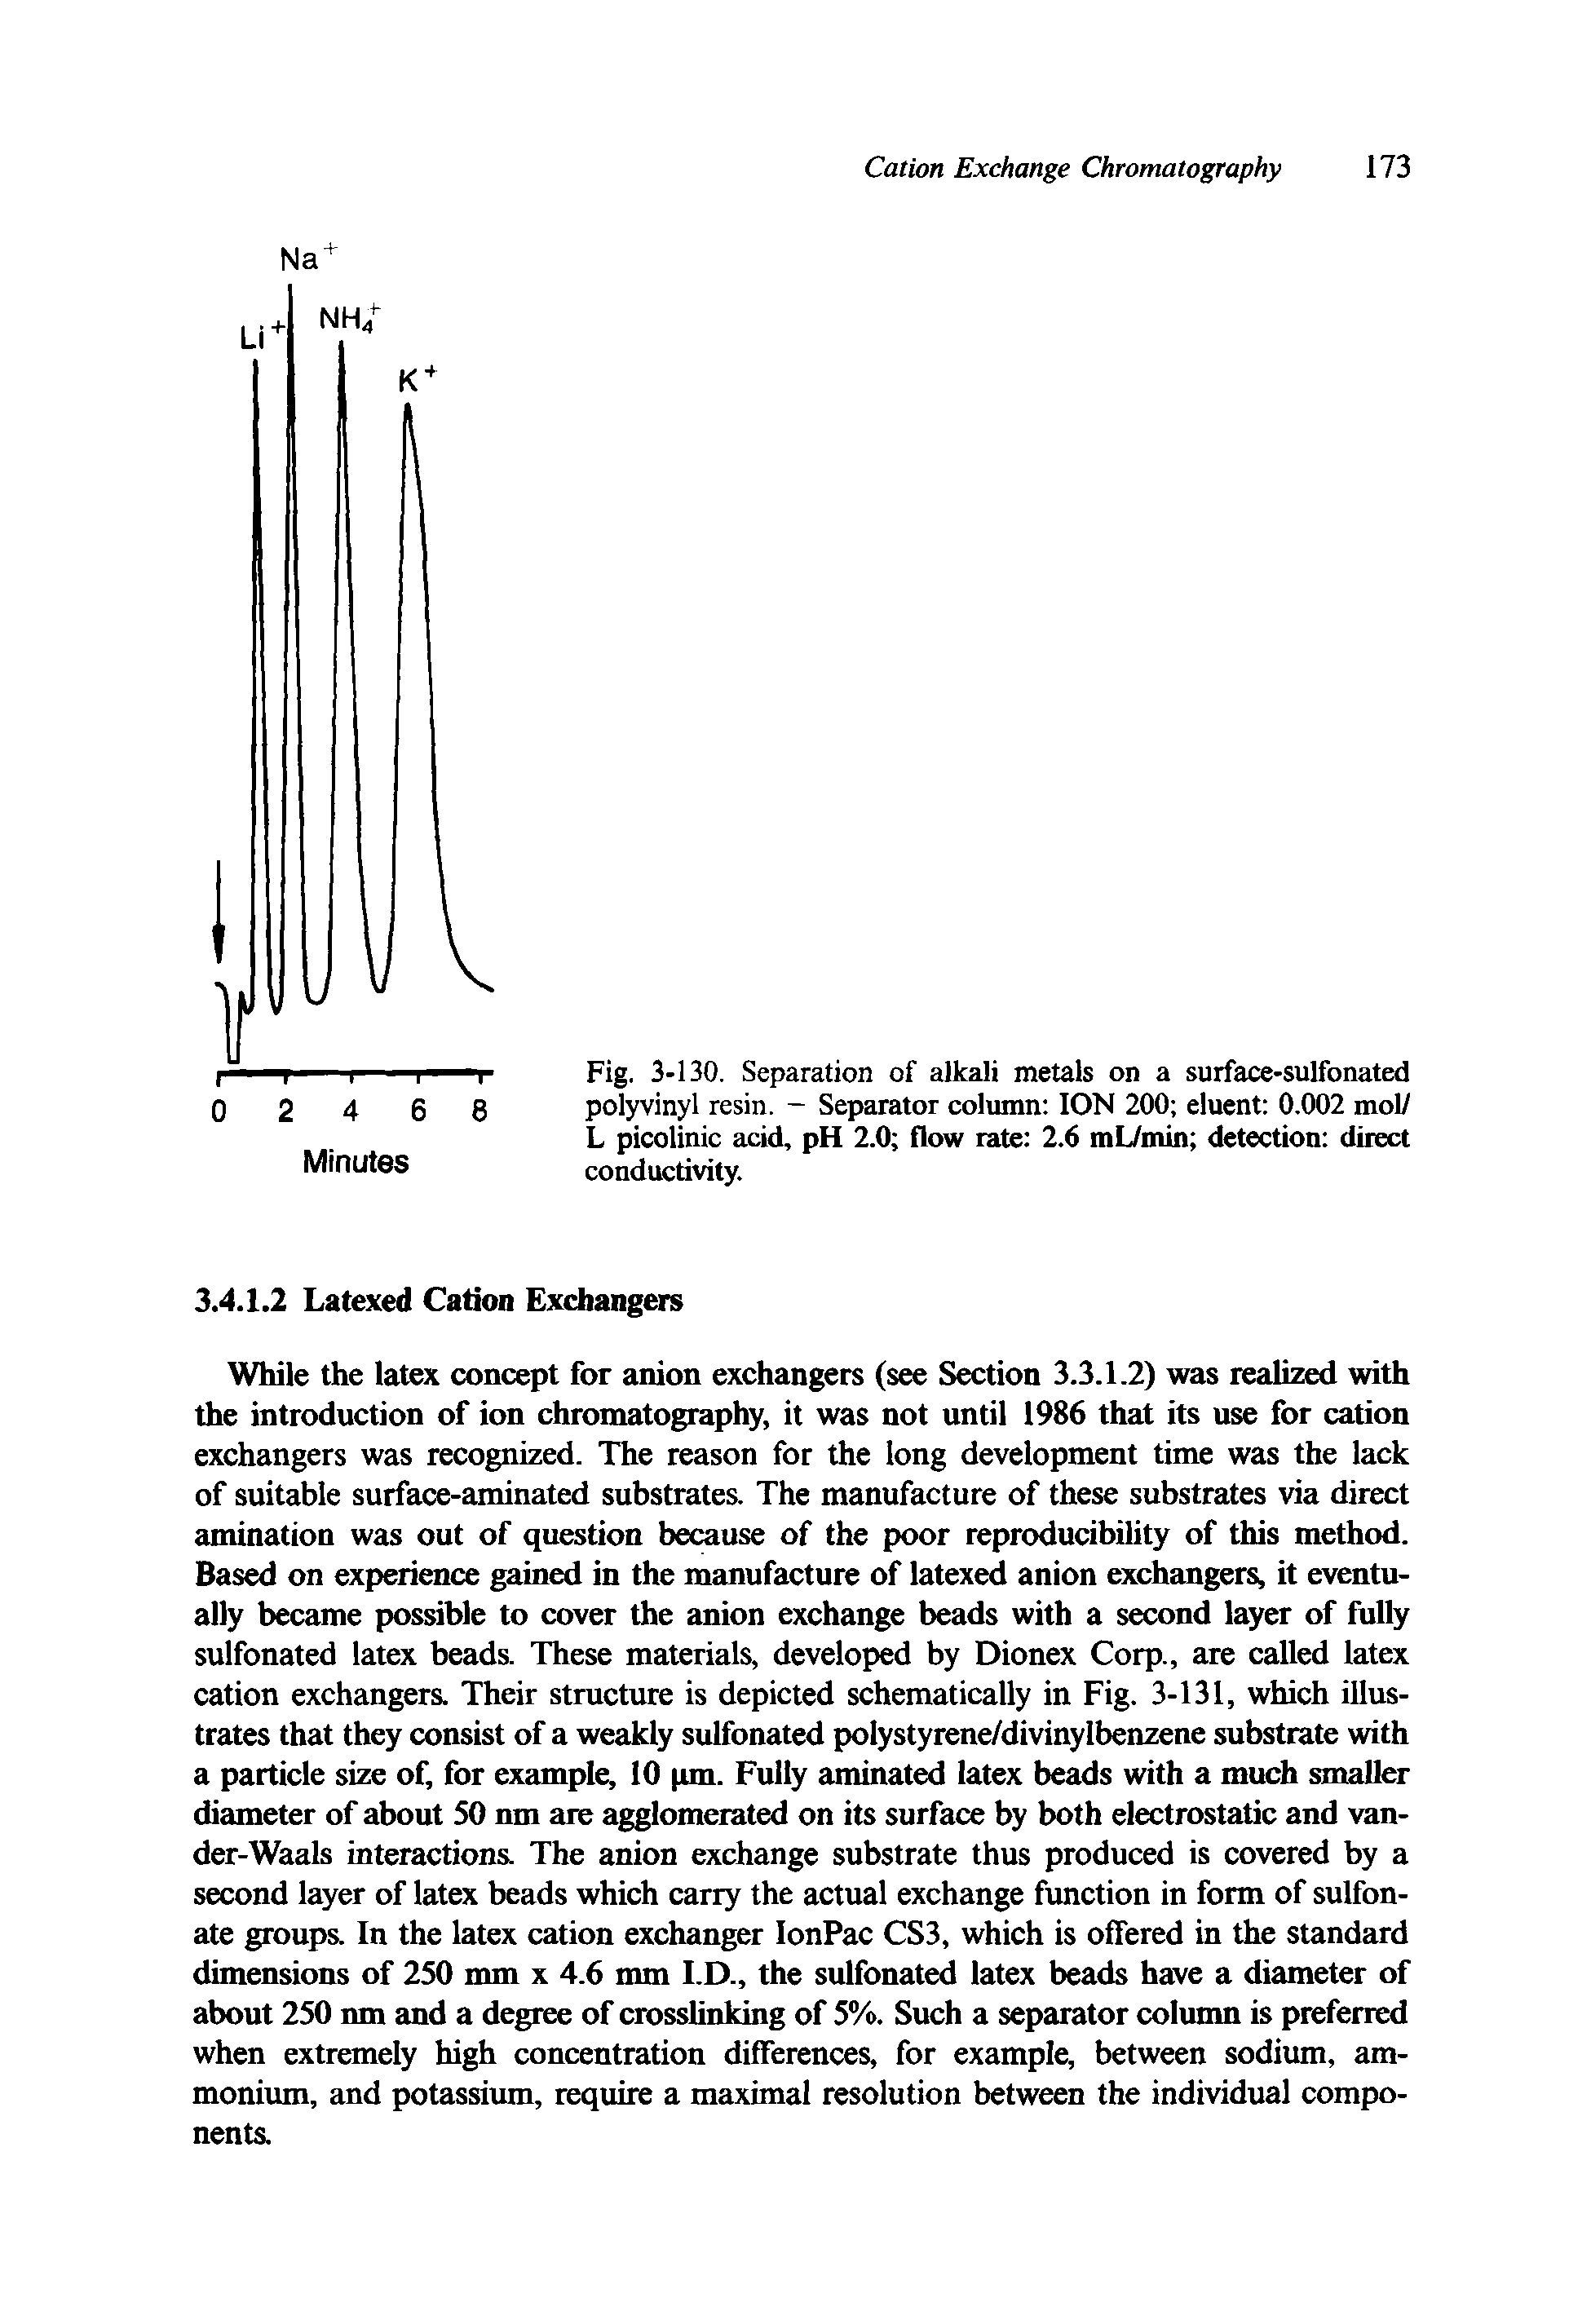 Fig. 3-130. Separation of alkali metals on a surface-sulfonated polyvinyl resin. - Separator column ION 200 eluent 0.002 mol/ L picolinic acid, pH 2.0 flow rate 2.6 mL/min detection direct conductivity.